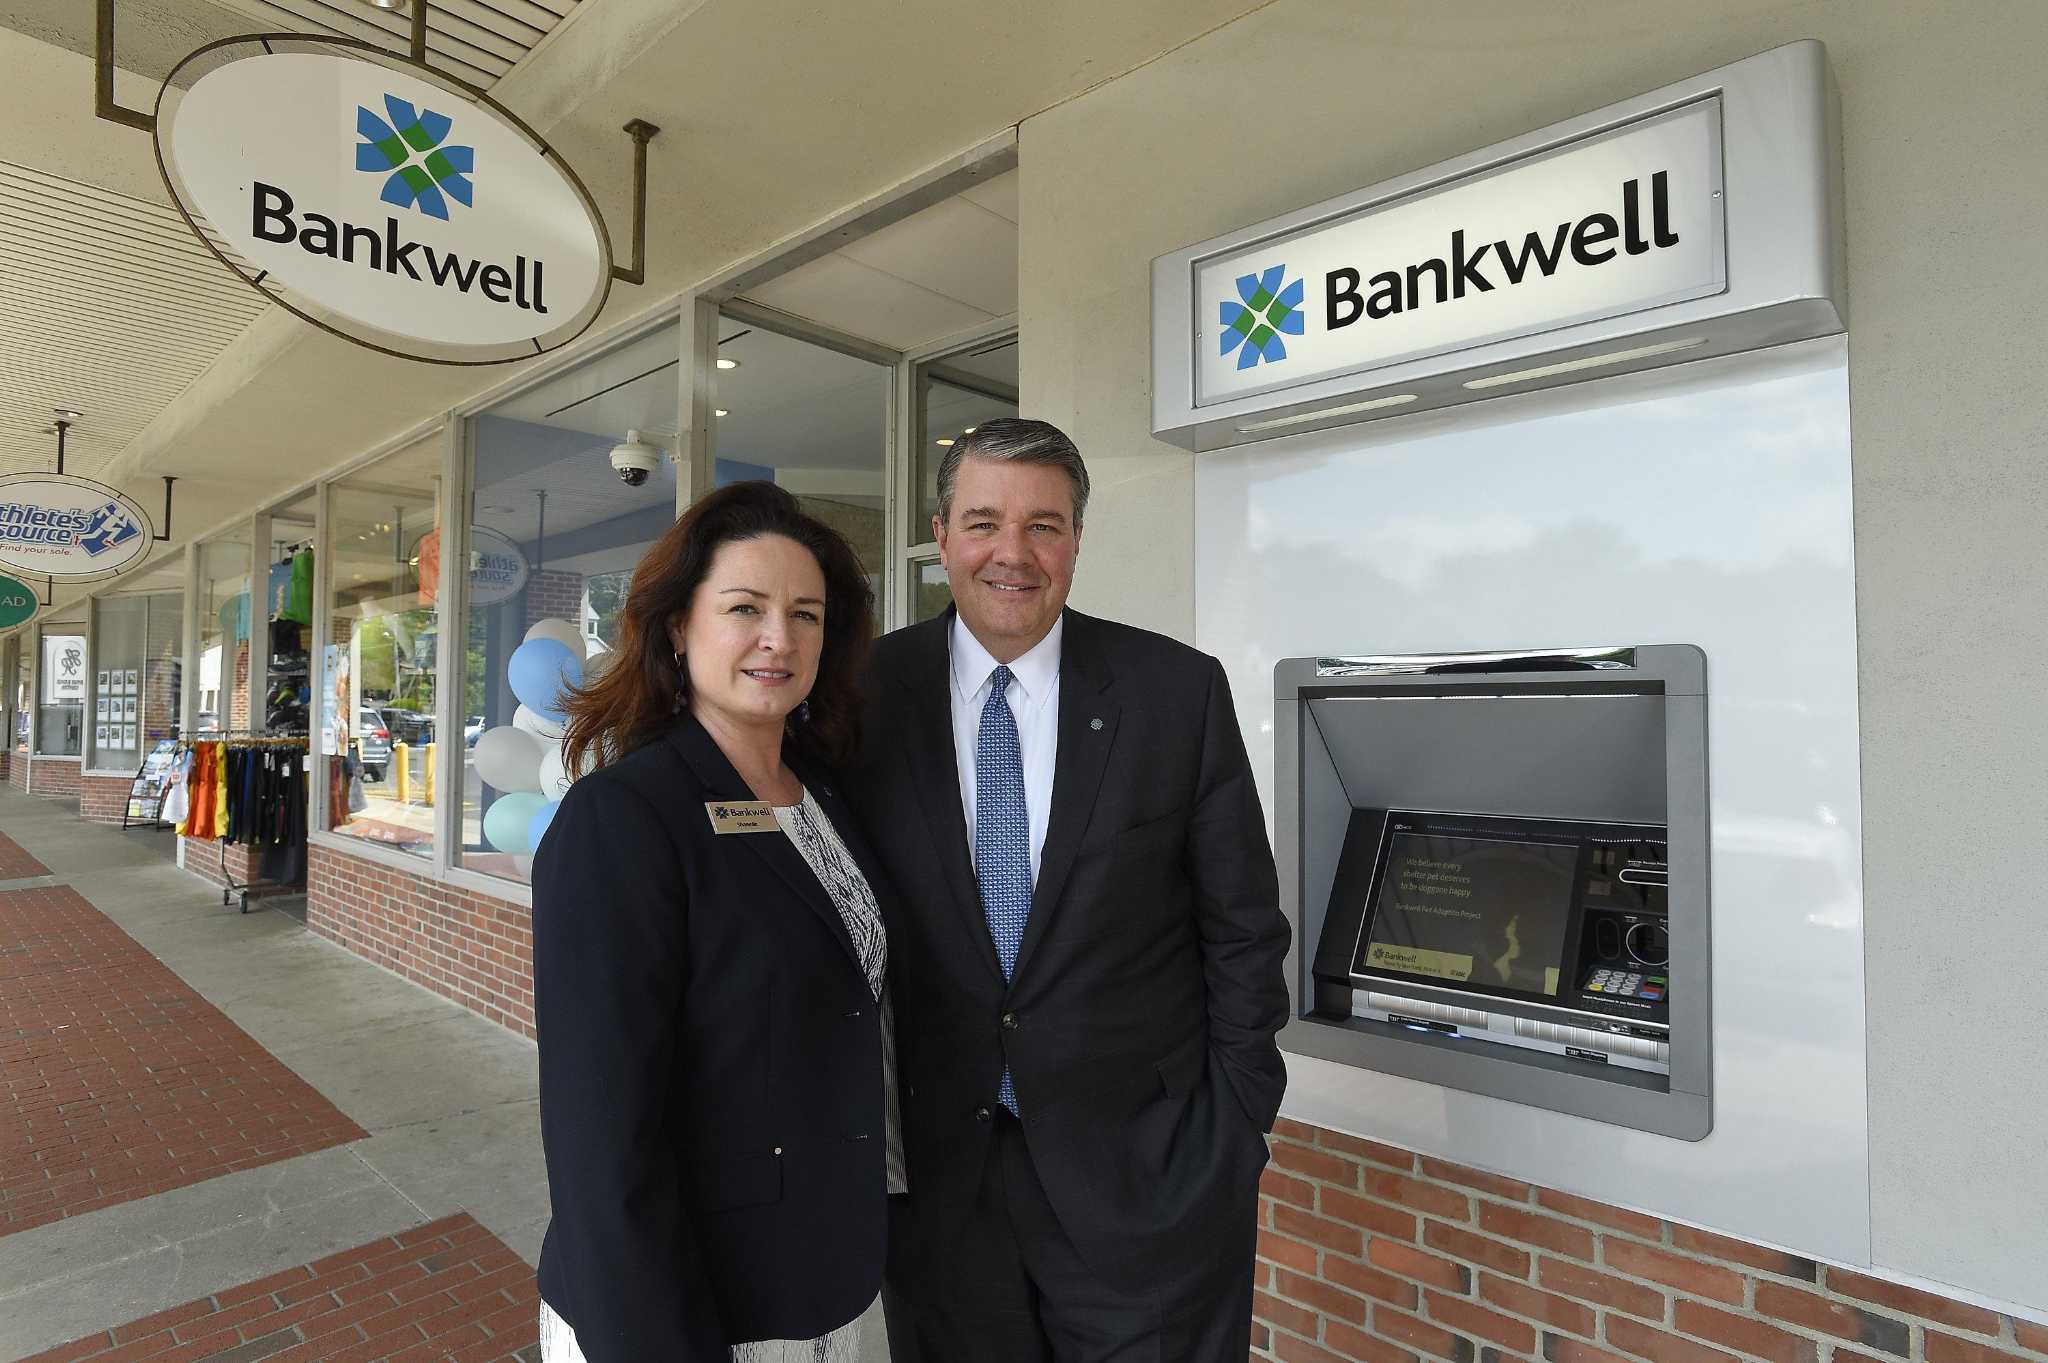 New Branches Show Bankwell Confidence In Brick And Mortar